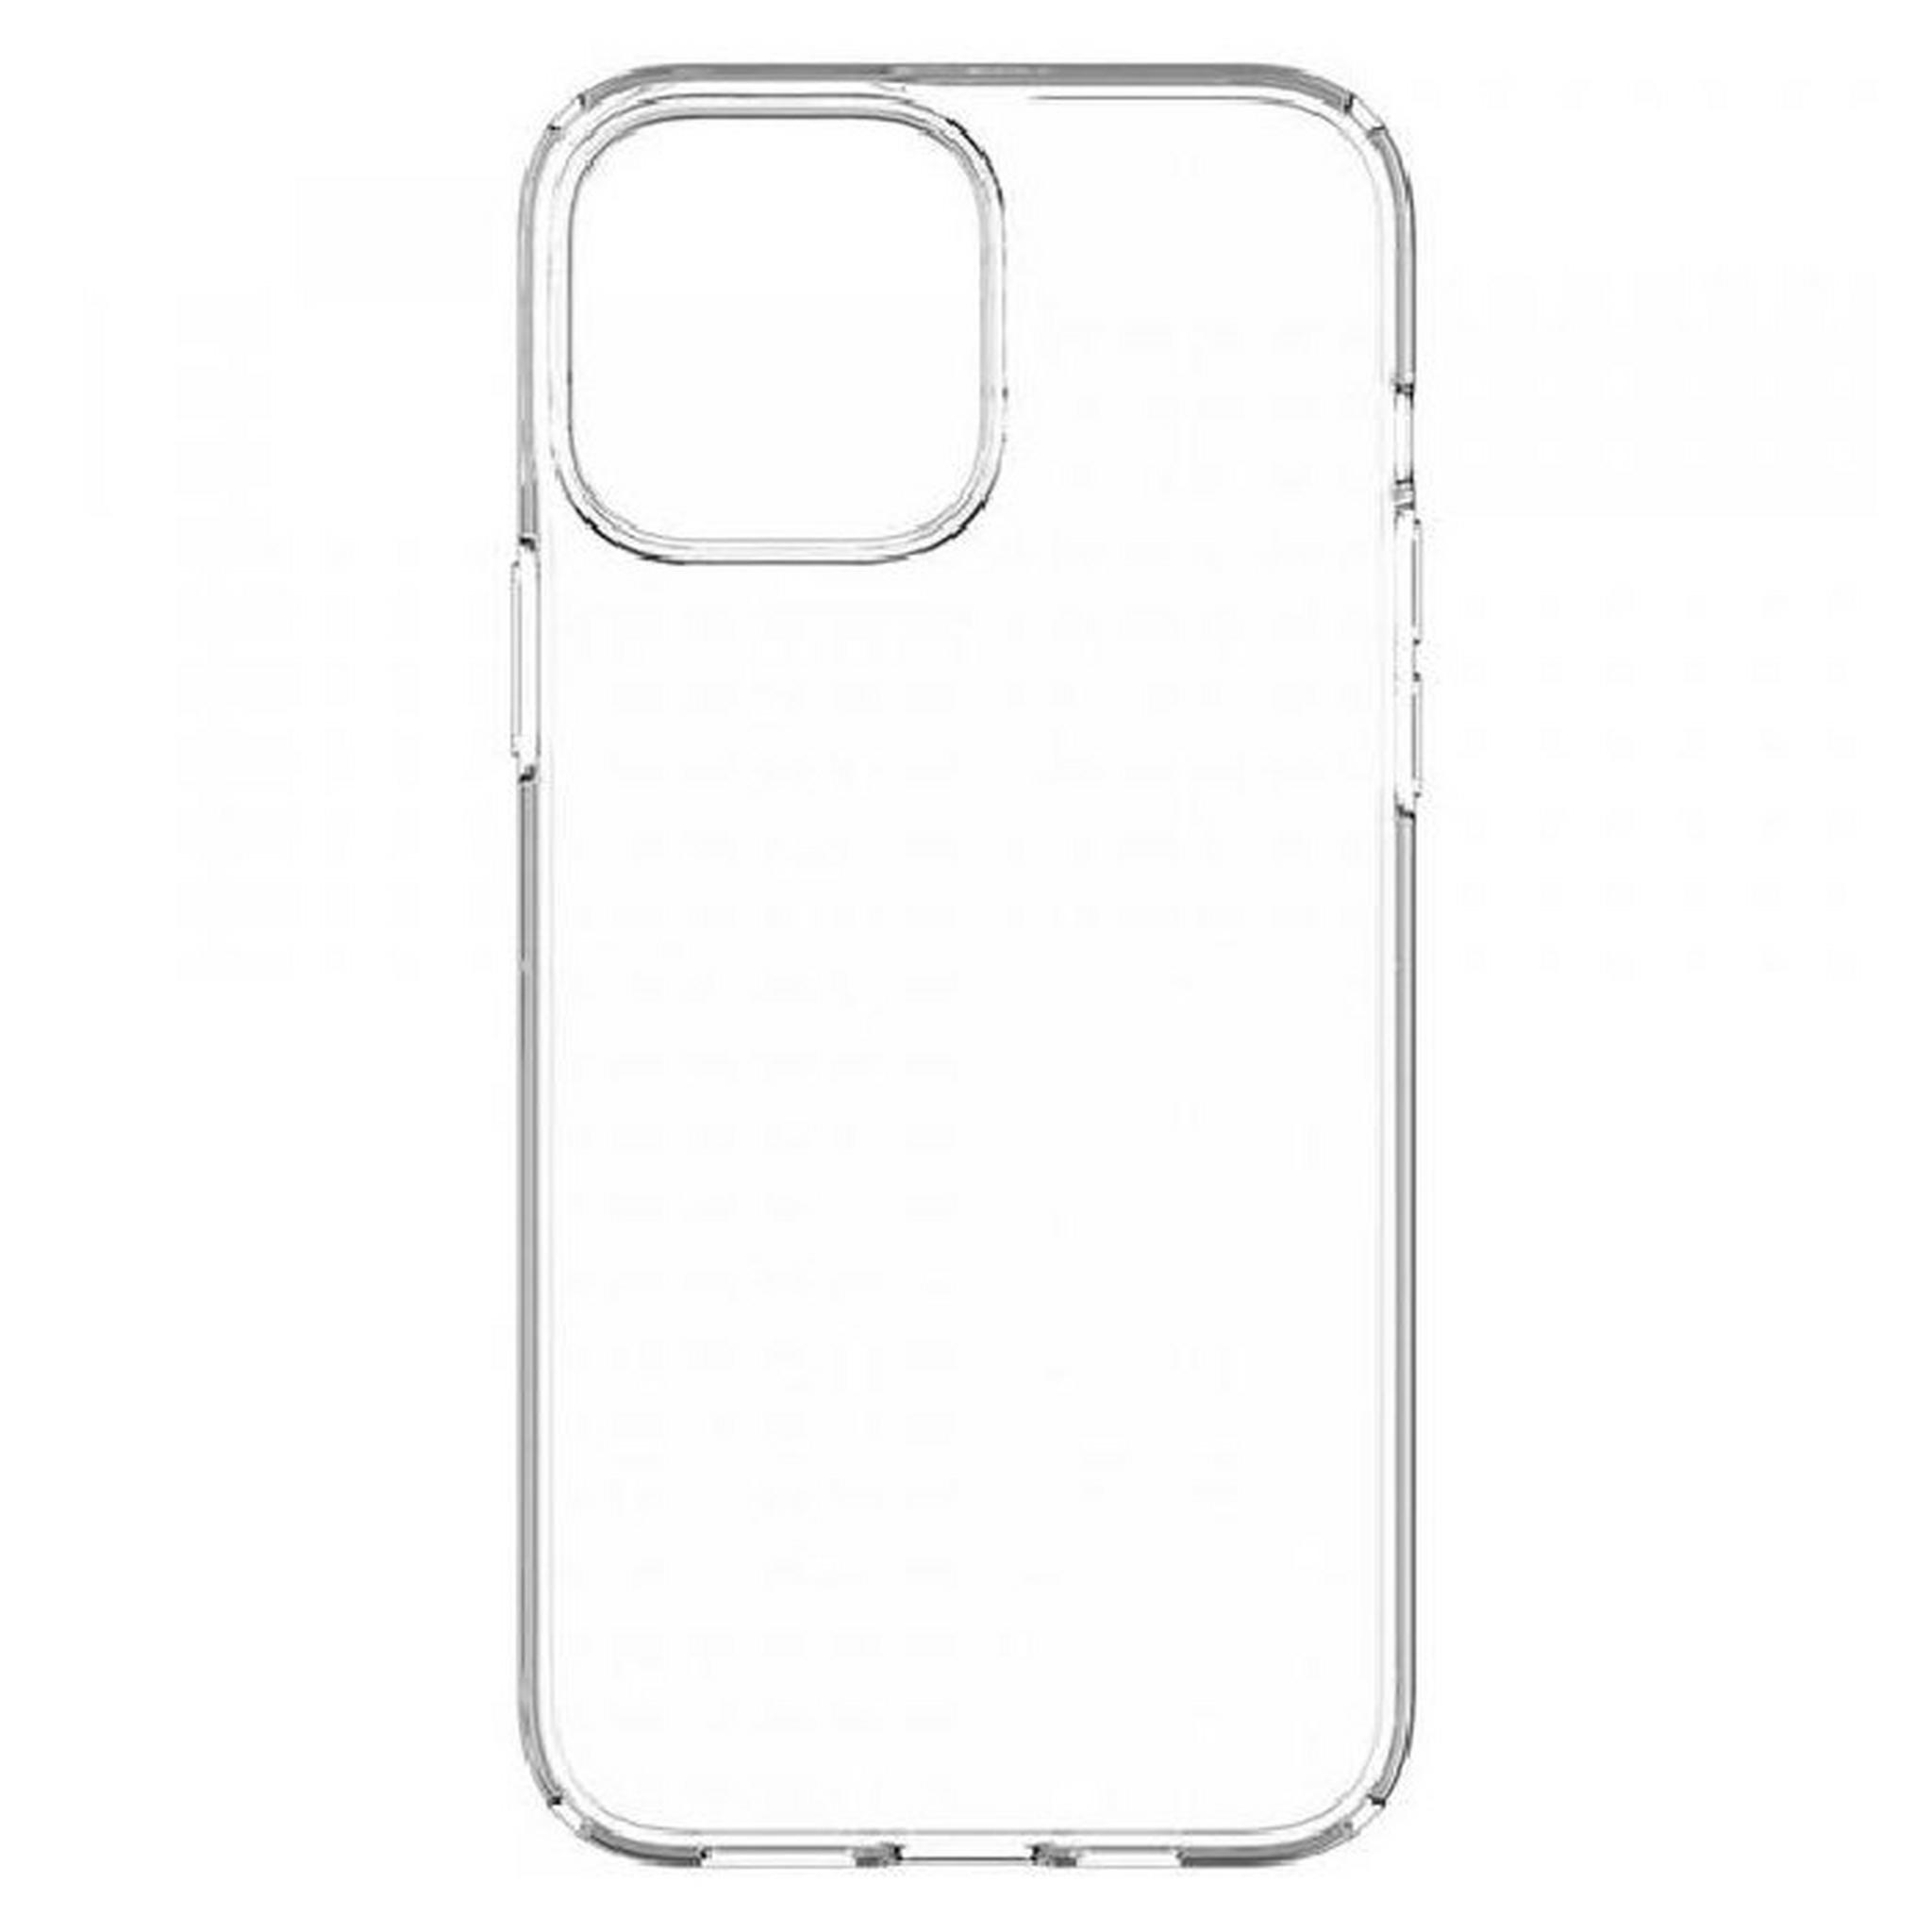 Spigen Crystal iPhone 13 Pro Max Case - Crystal Clear